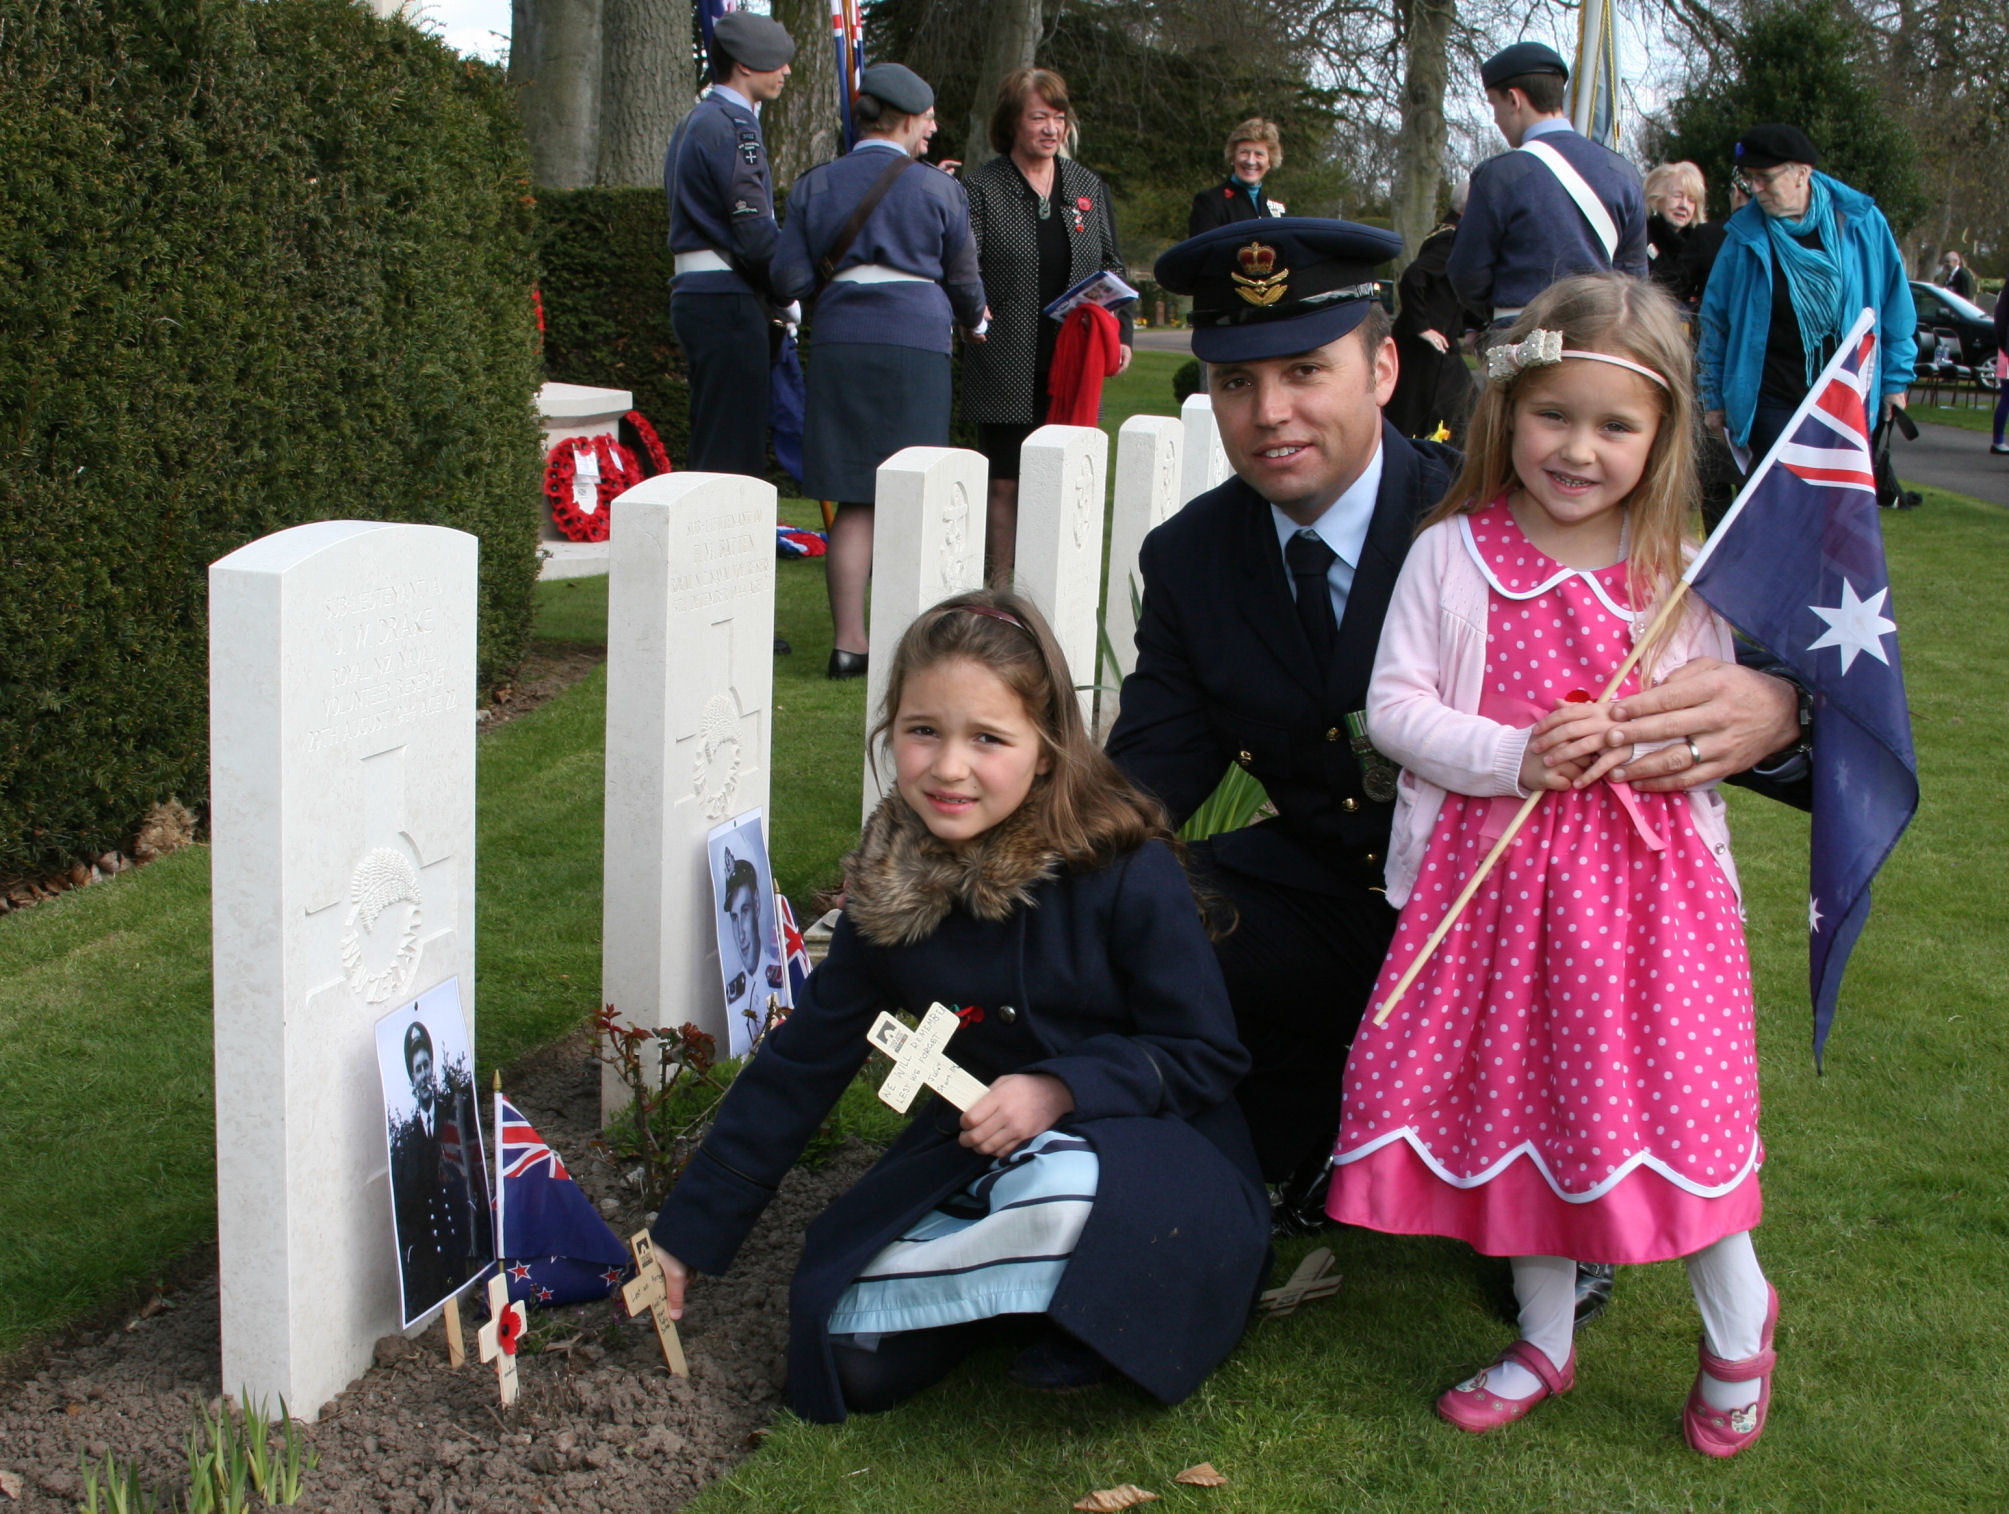 Squadron Leader Stuart McLean of the Australian Air Force was joined by his two children Georgia, 7, and Chloe, 4, in placing a cross at a grave.